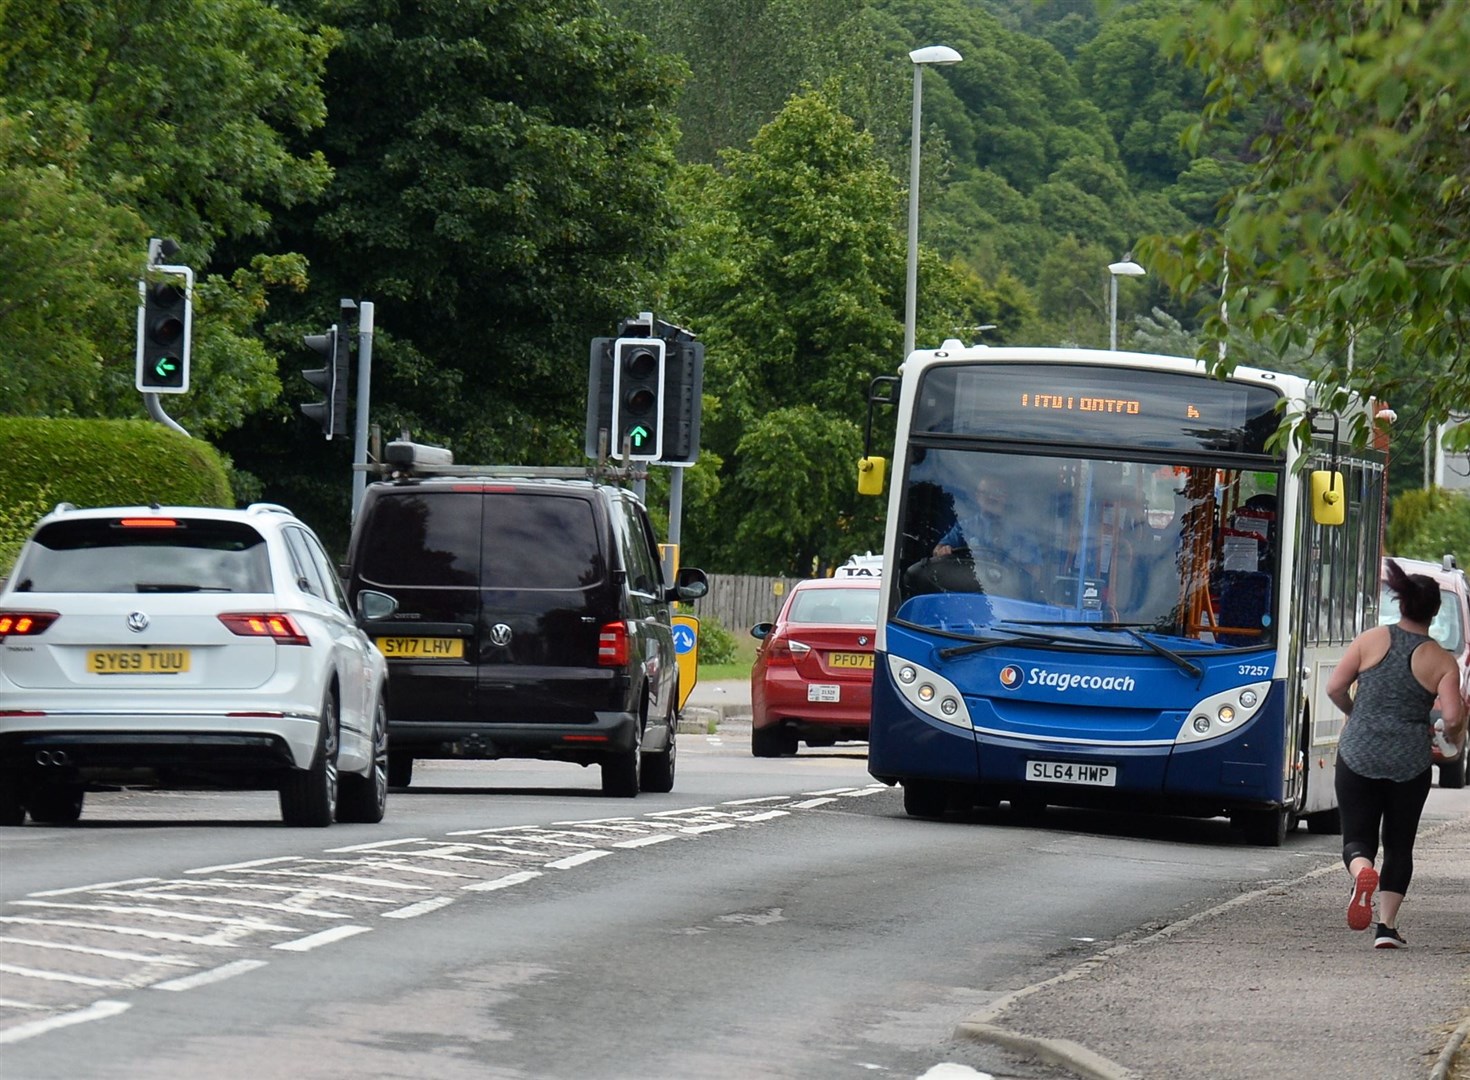 The bus gate will enable buses to head into Old Perth Road from Raigmore Hospital more easily.